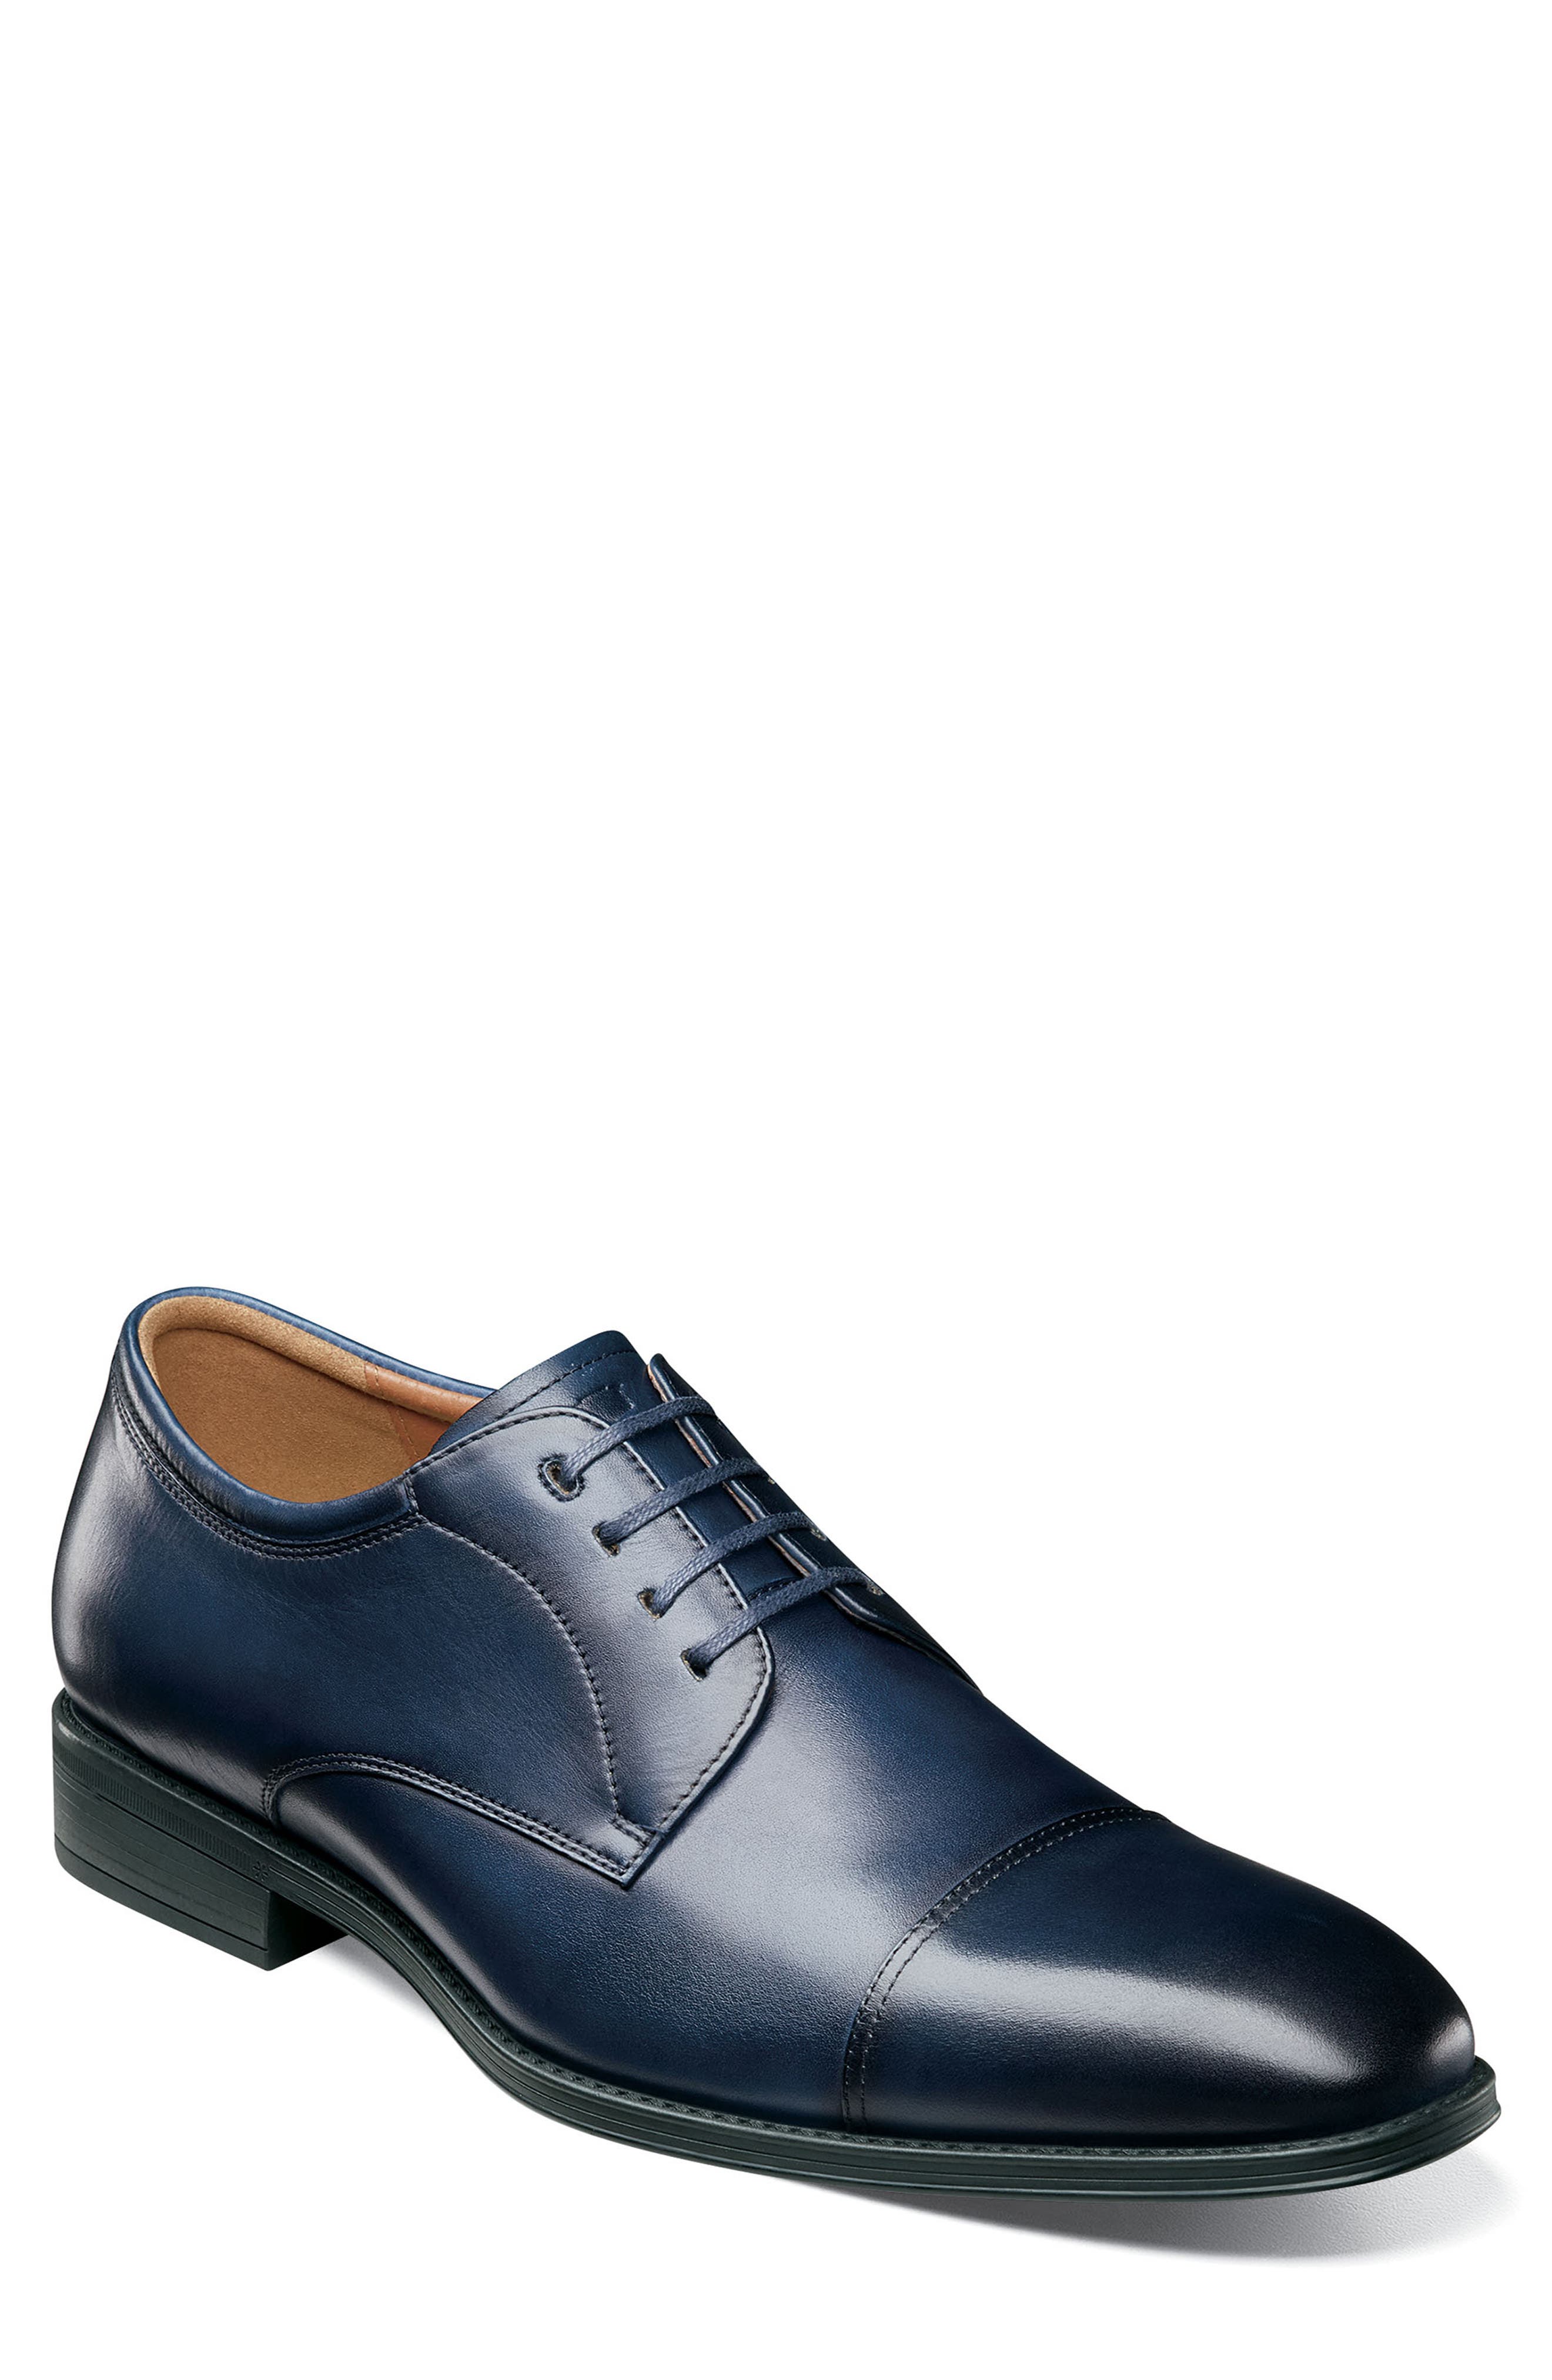 mens formal shoes near me